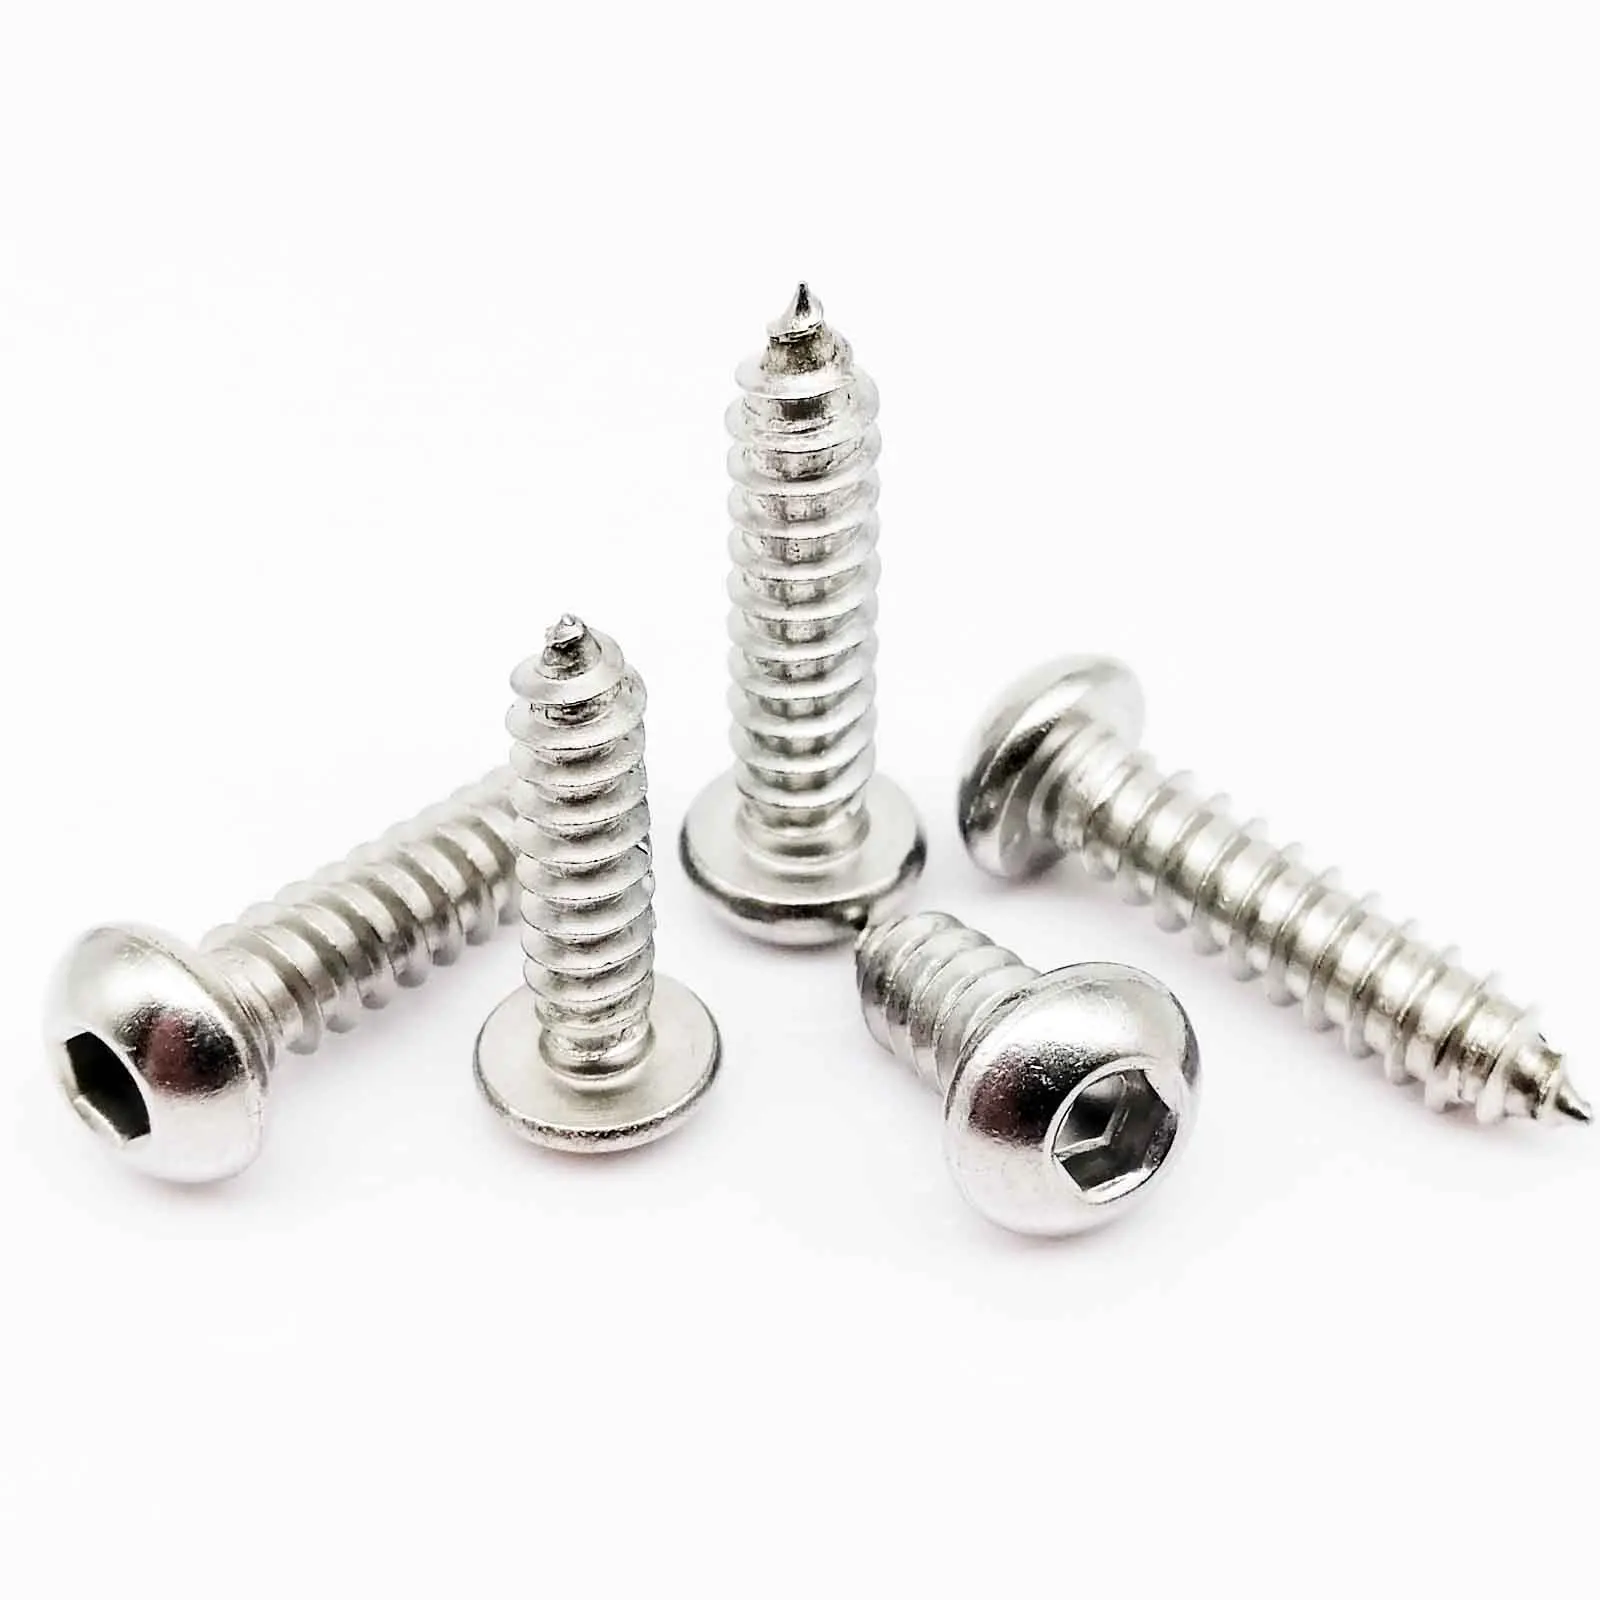 304 A2 Stainless Flat Countersunk Head Self Tapping Allen Key Screws M3 M4 M5 M6 